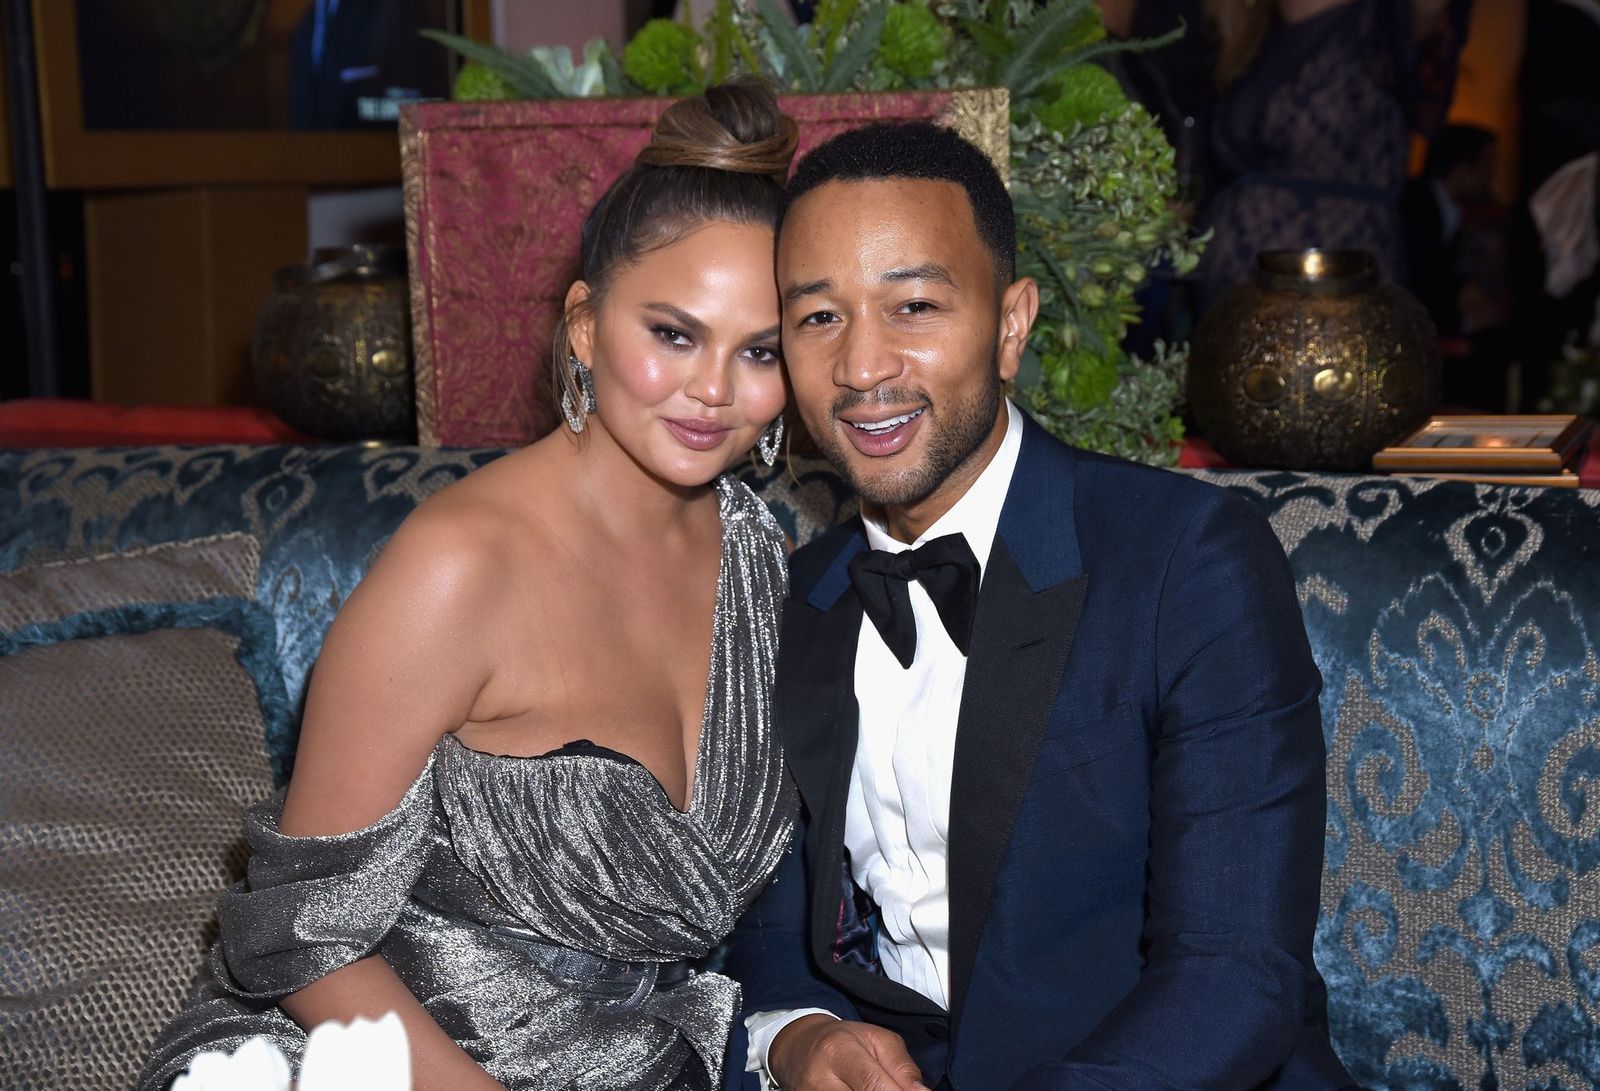 Chrissy Teigen and John Legend at Hulu's Emmy Party at Nomad Hotel on September 17, 2018 | Photo: Getty Images